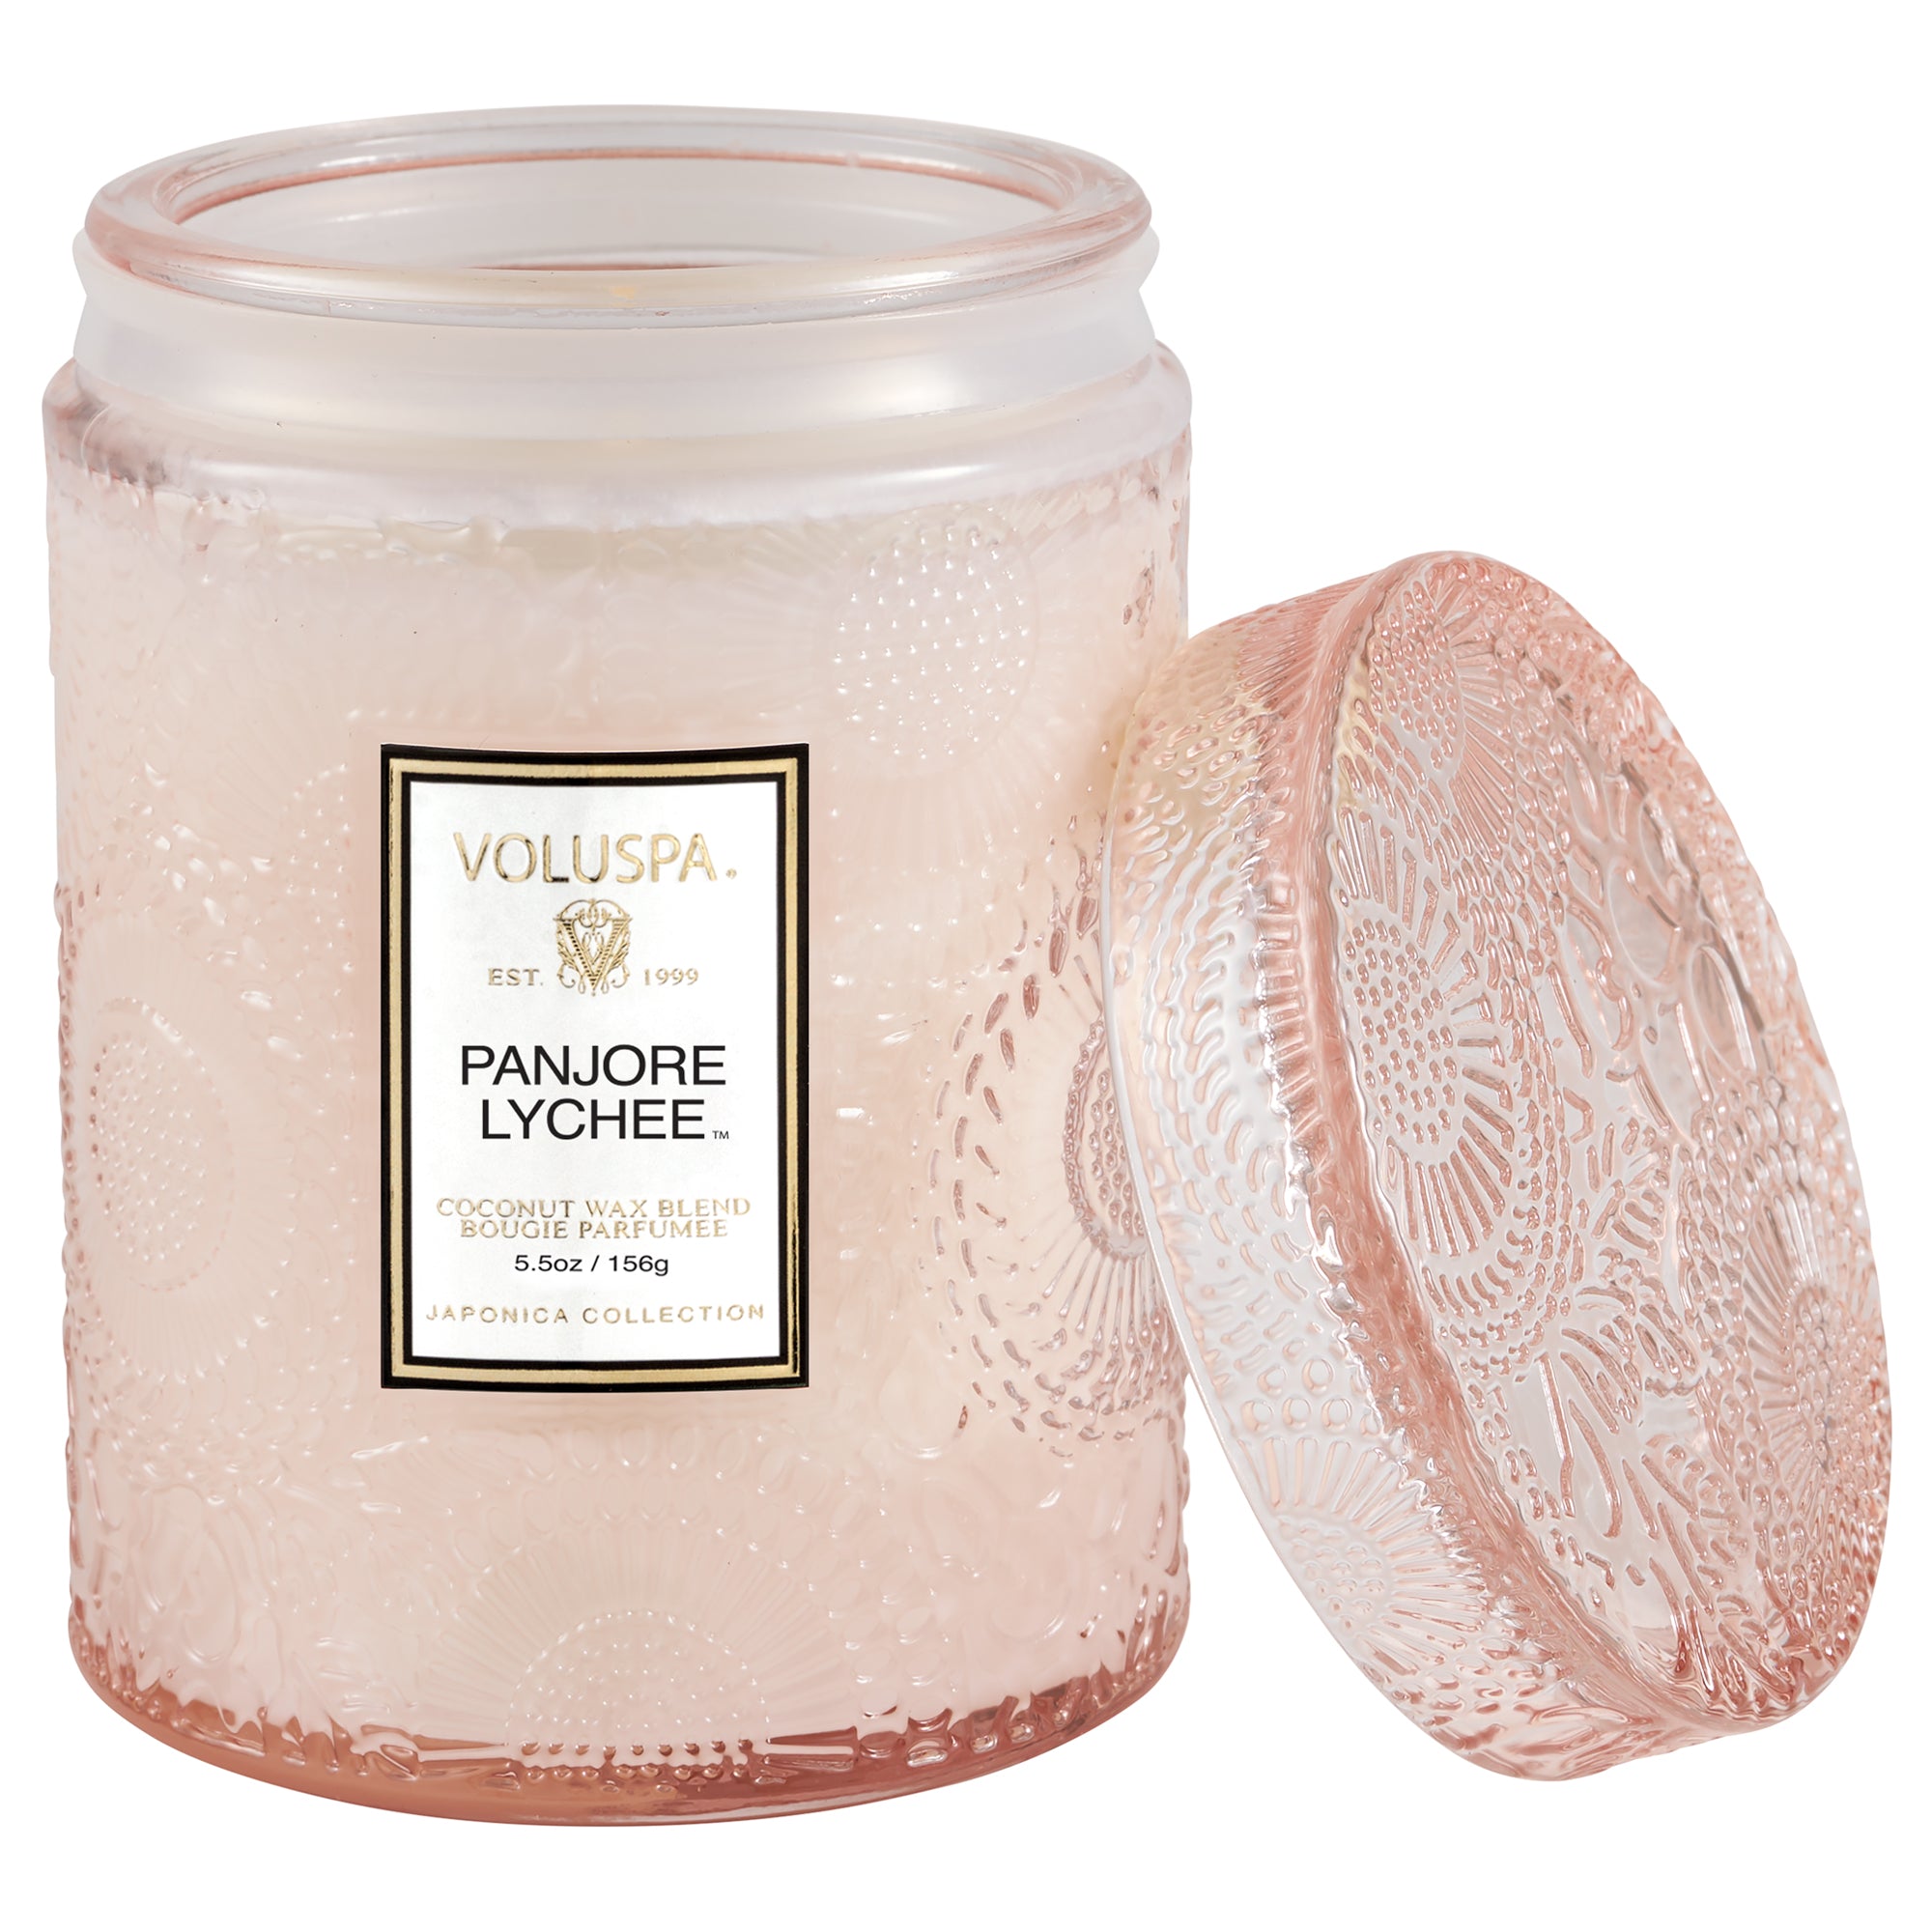 Panjore Lychee - Small Jar Candle